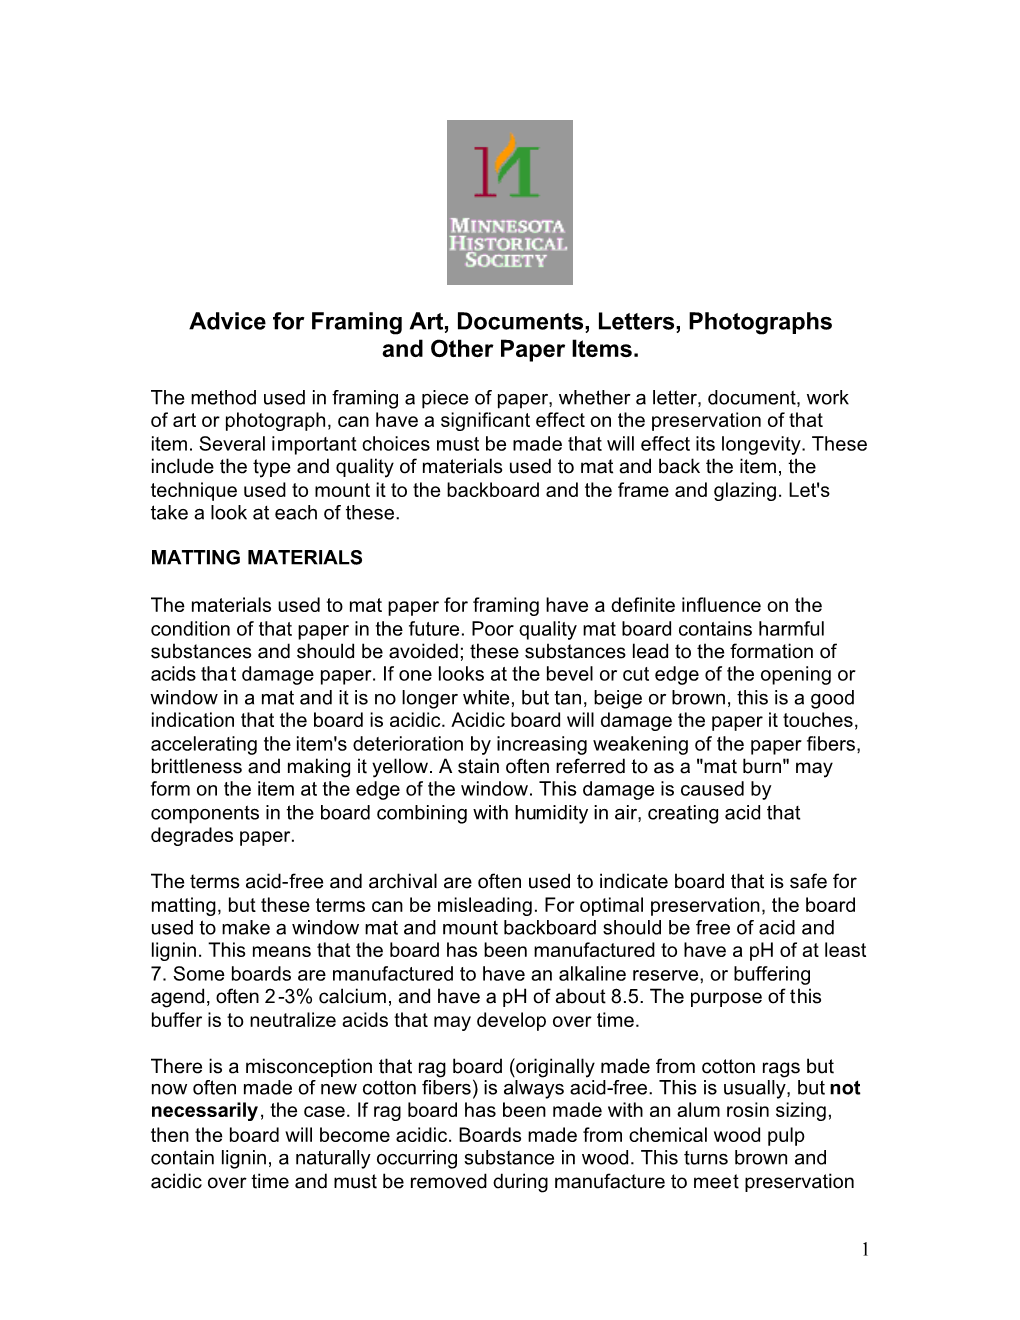 Framing Papers and Photos for Display and Preservation (PDF)